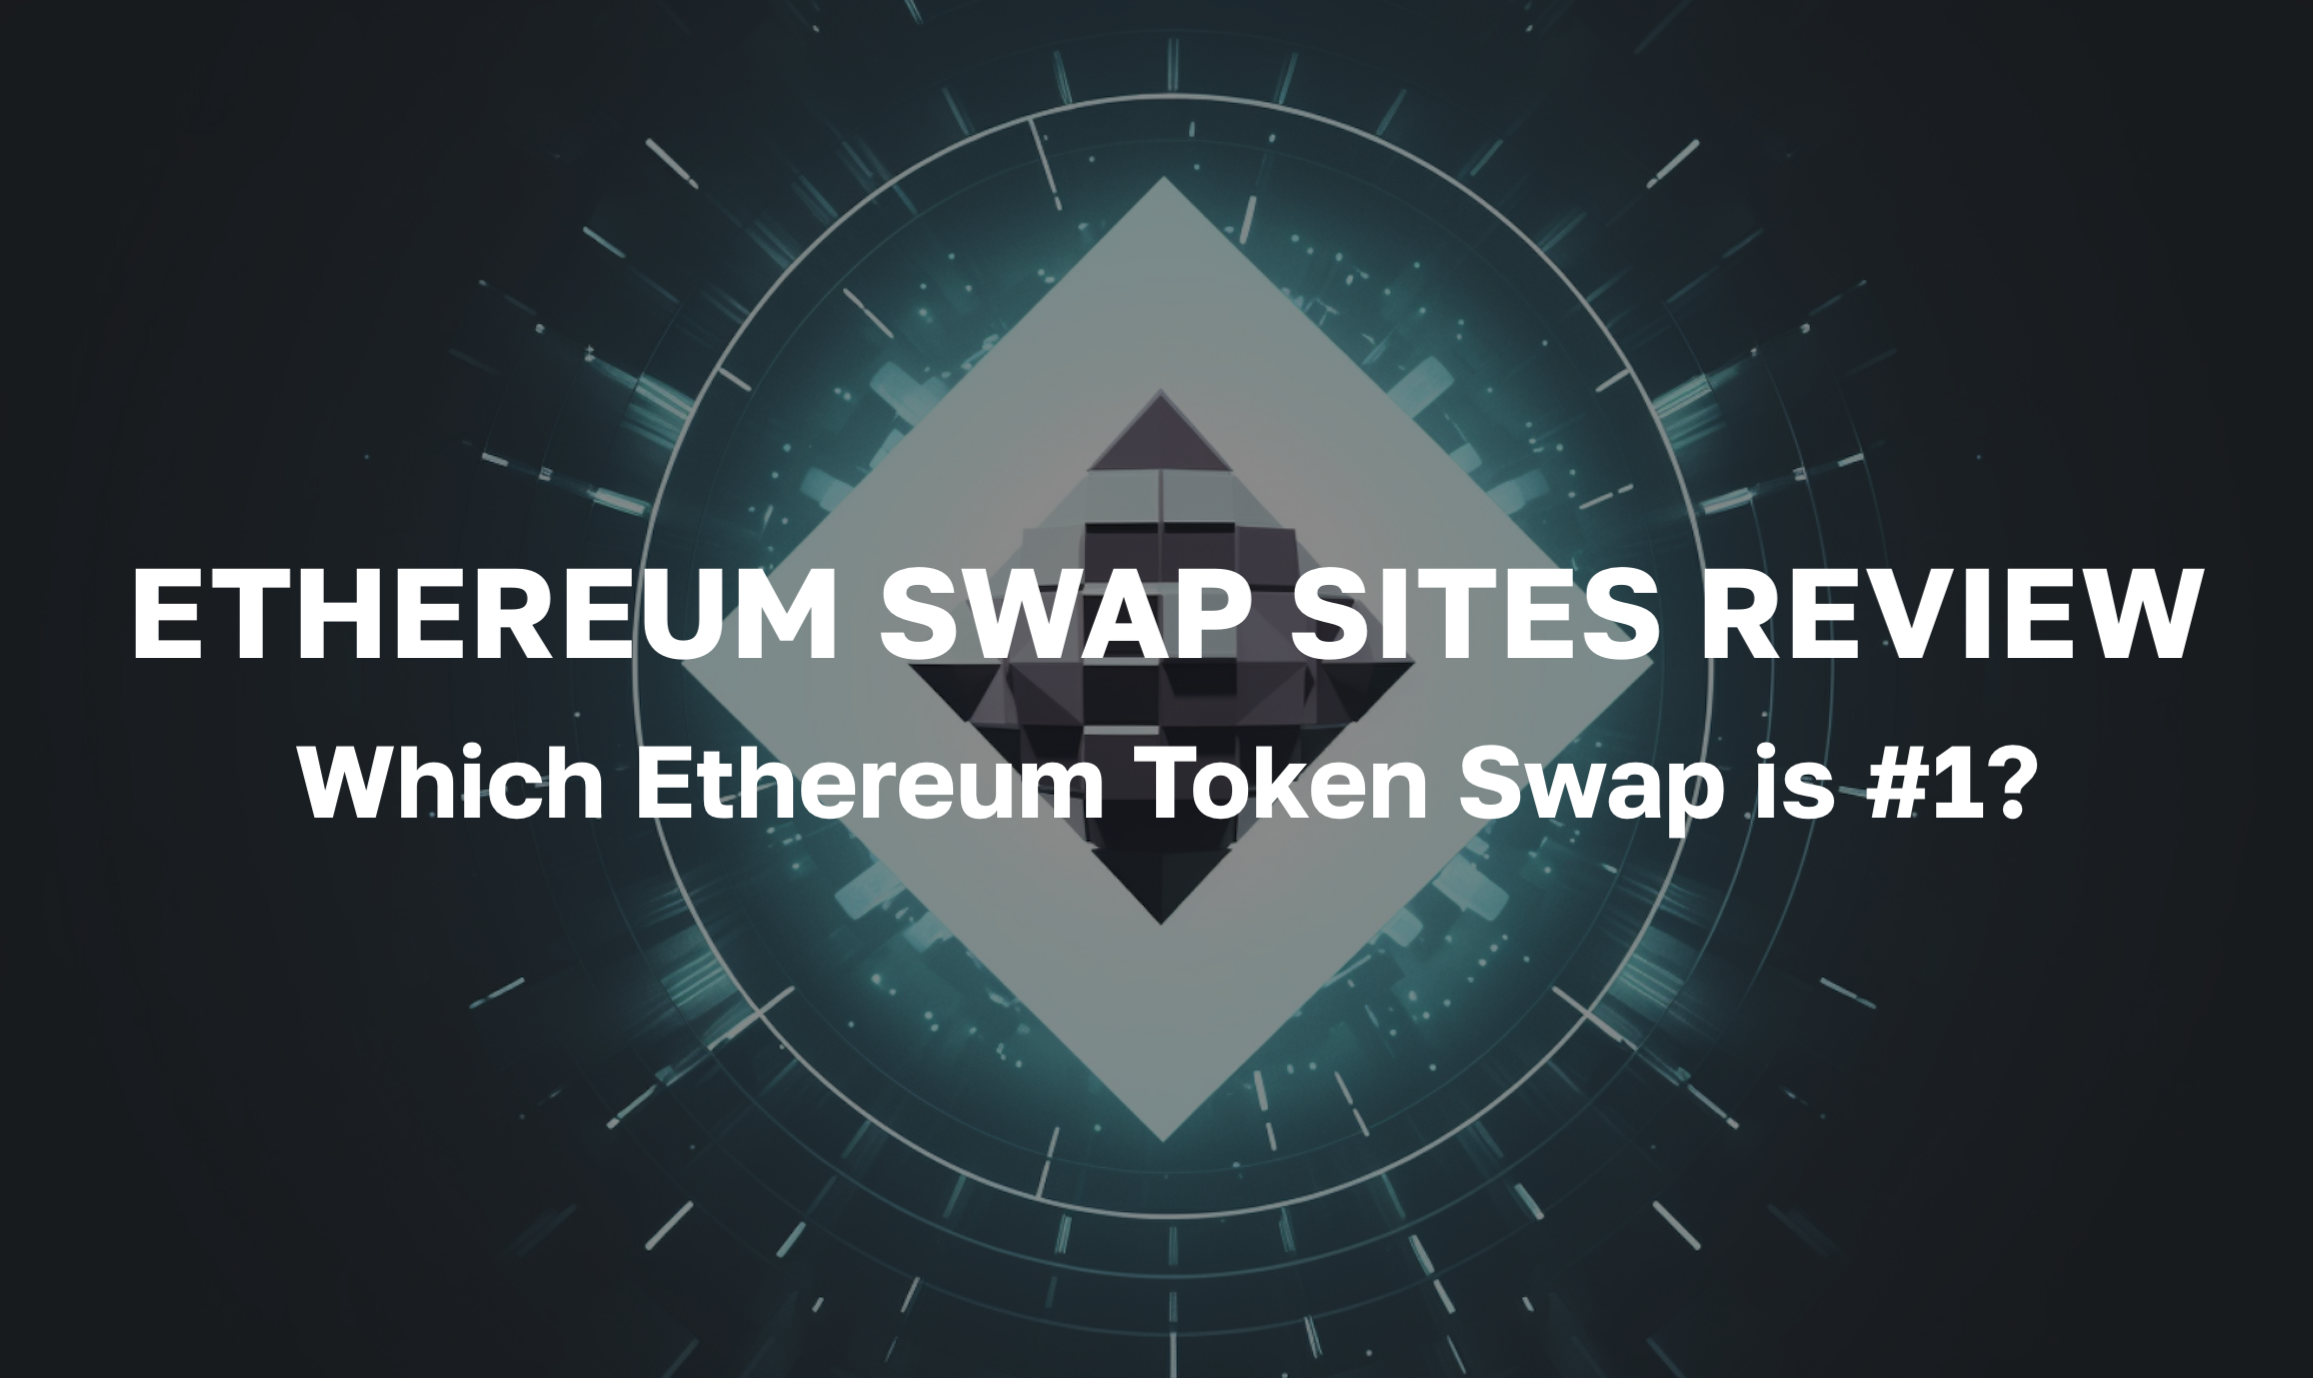 Ethereum Swap Sites Review - Which Ethereum Token Swap is #1?